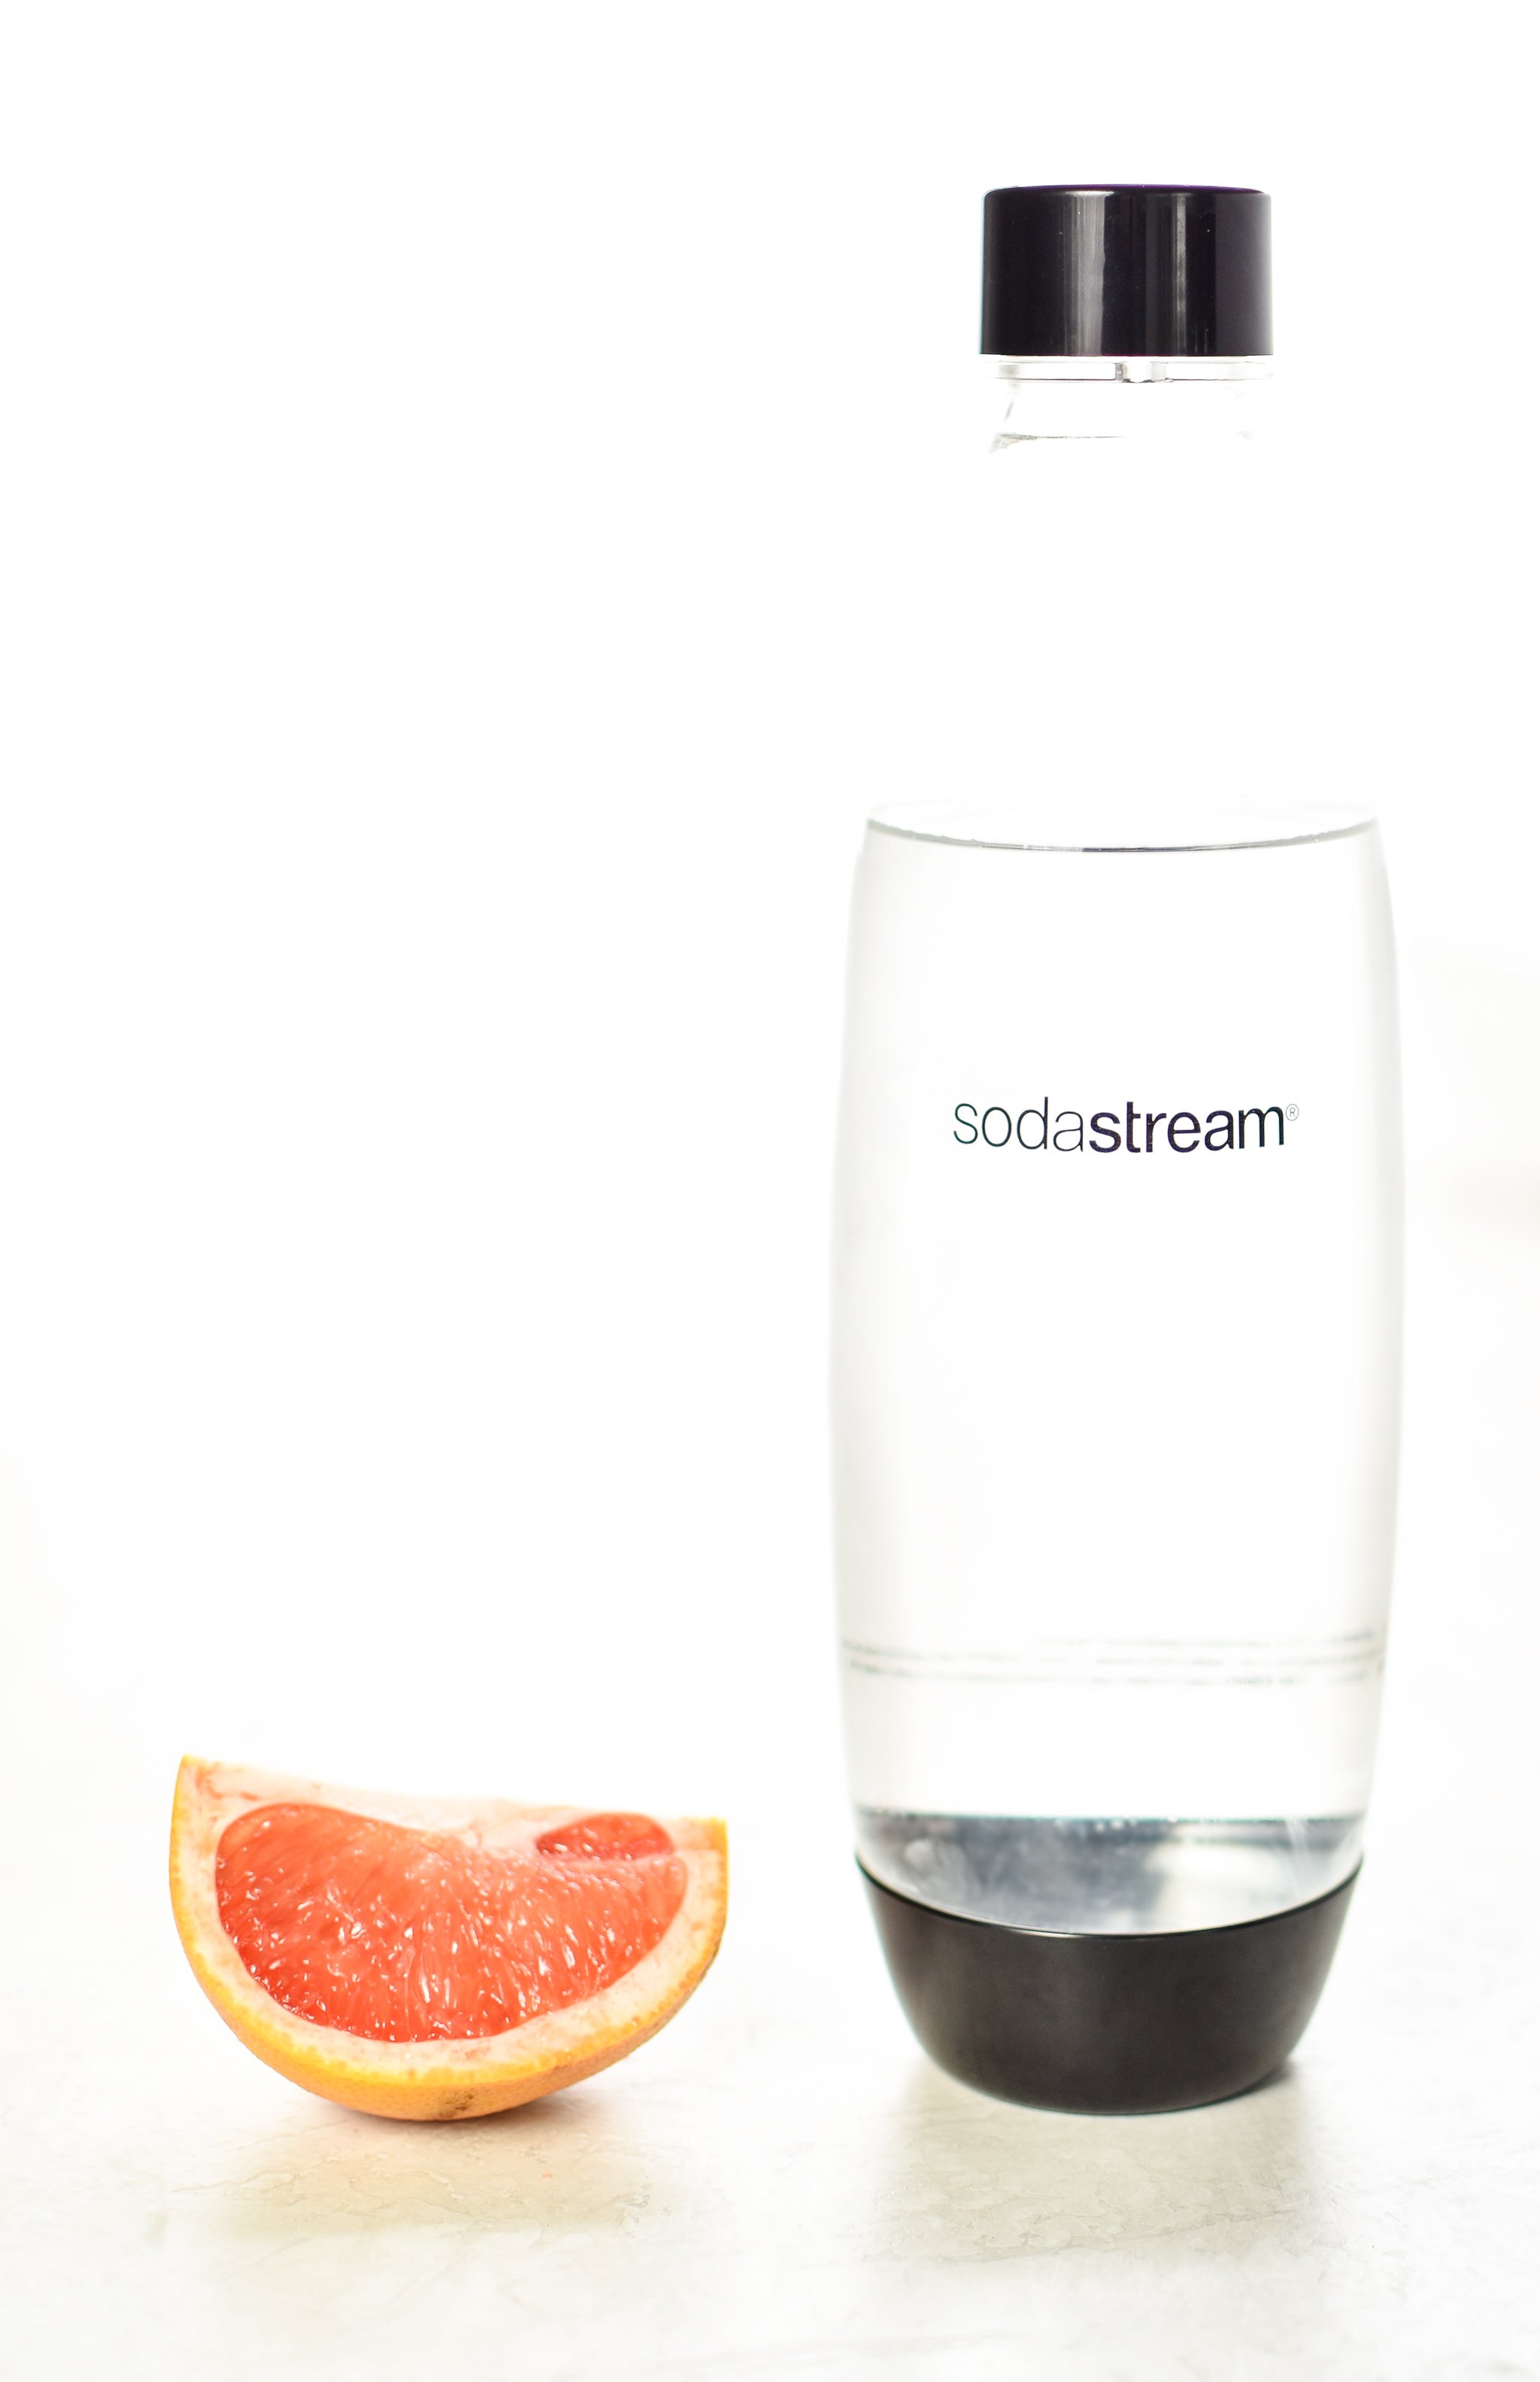 A slice of grapefruit sitting next to a SodaStream carbonating bottle filled with cold water in a bright room.